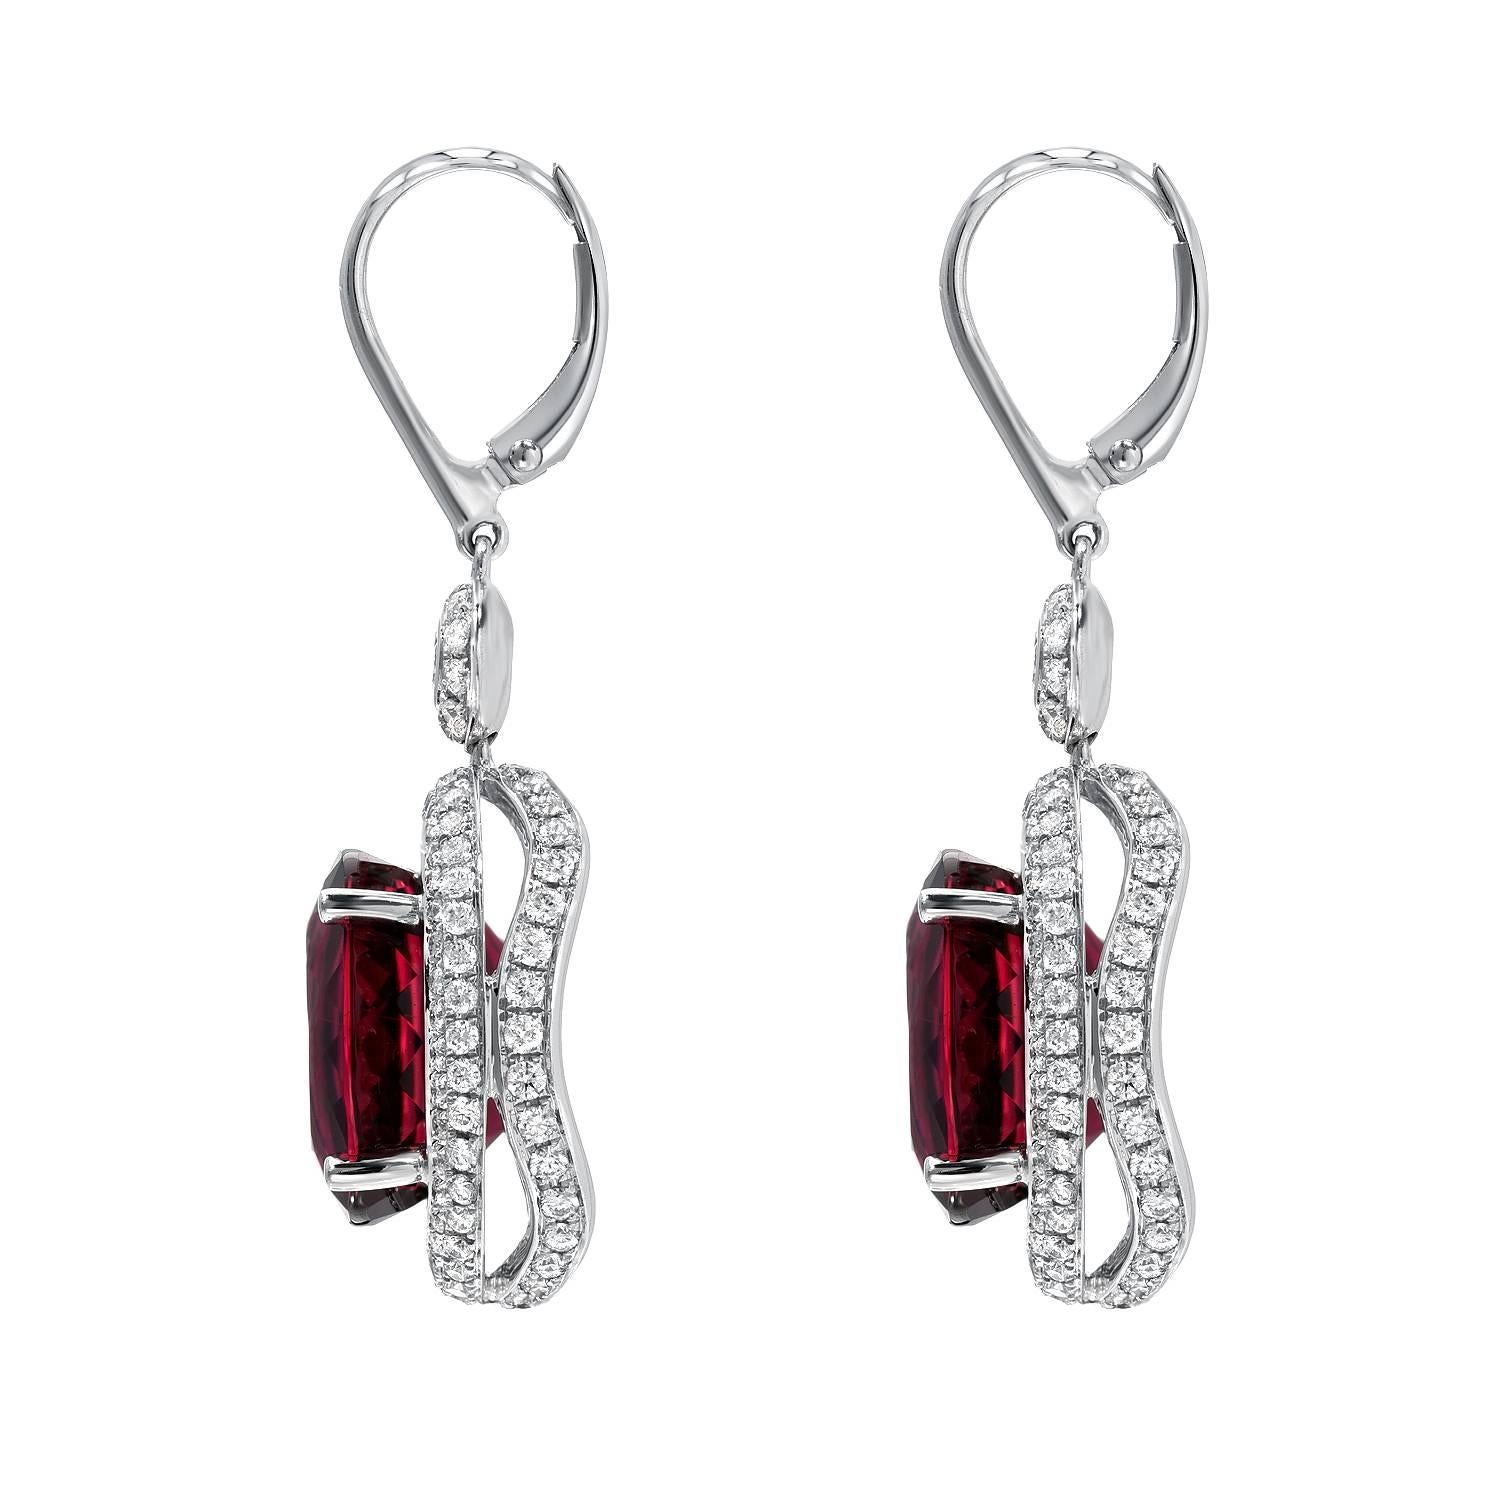 Superb 11.64ct Rubellite Tourmaline oval pair, and a total of 1.62ct round brilliant diamonds, are set in these remarkable 18K white gold, lever back, drop earrings.
Total length: 1.50 inches.